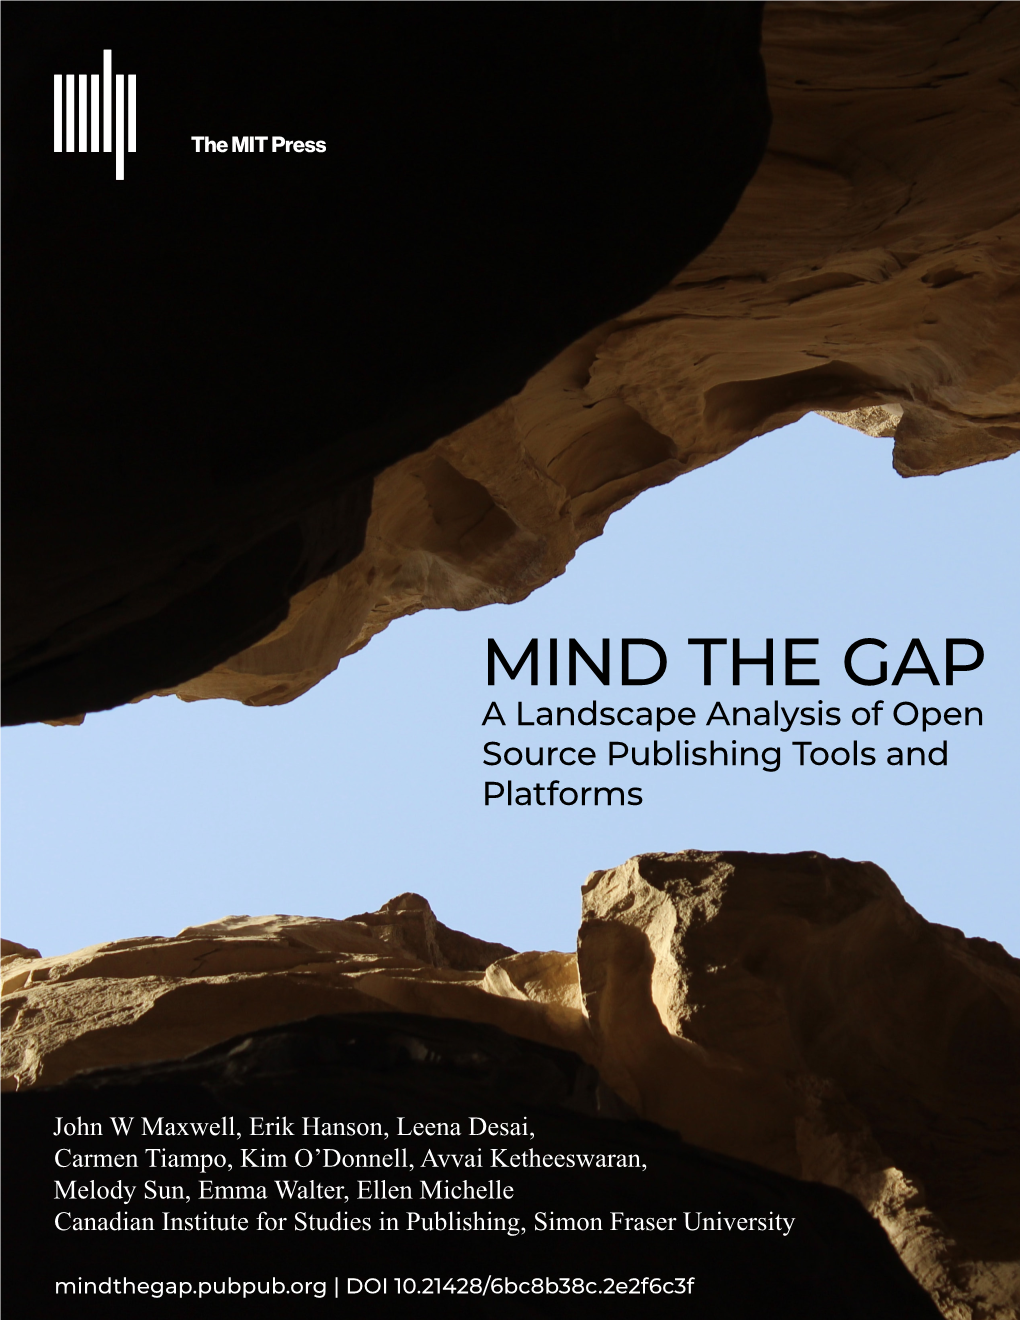 MIND the GAP a Landscape Analysis of Open Source Publishing Tools and Platforms